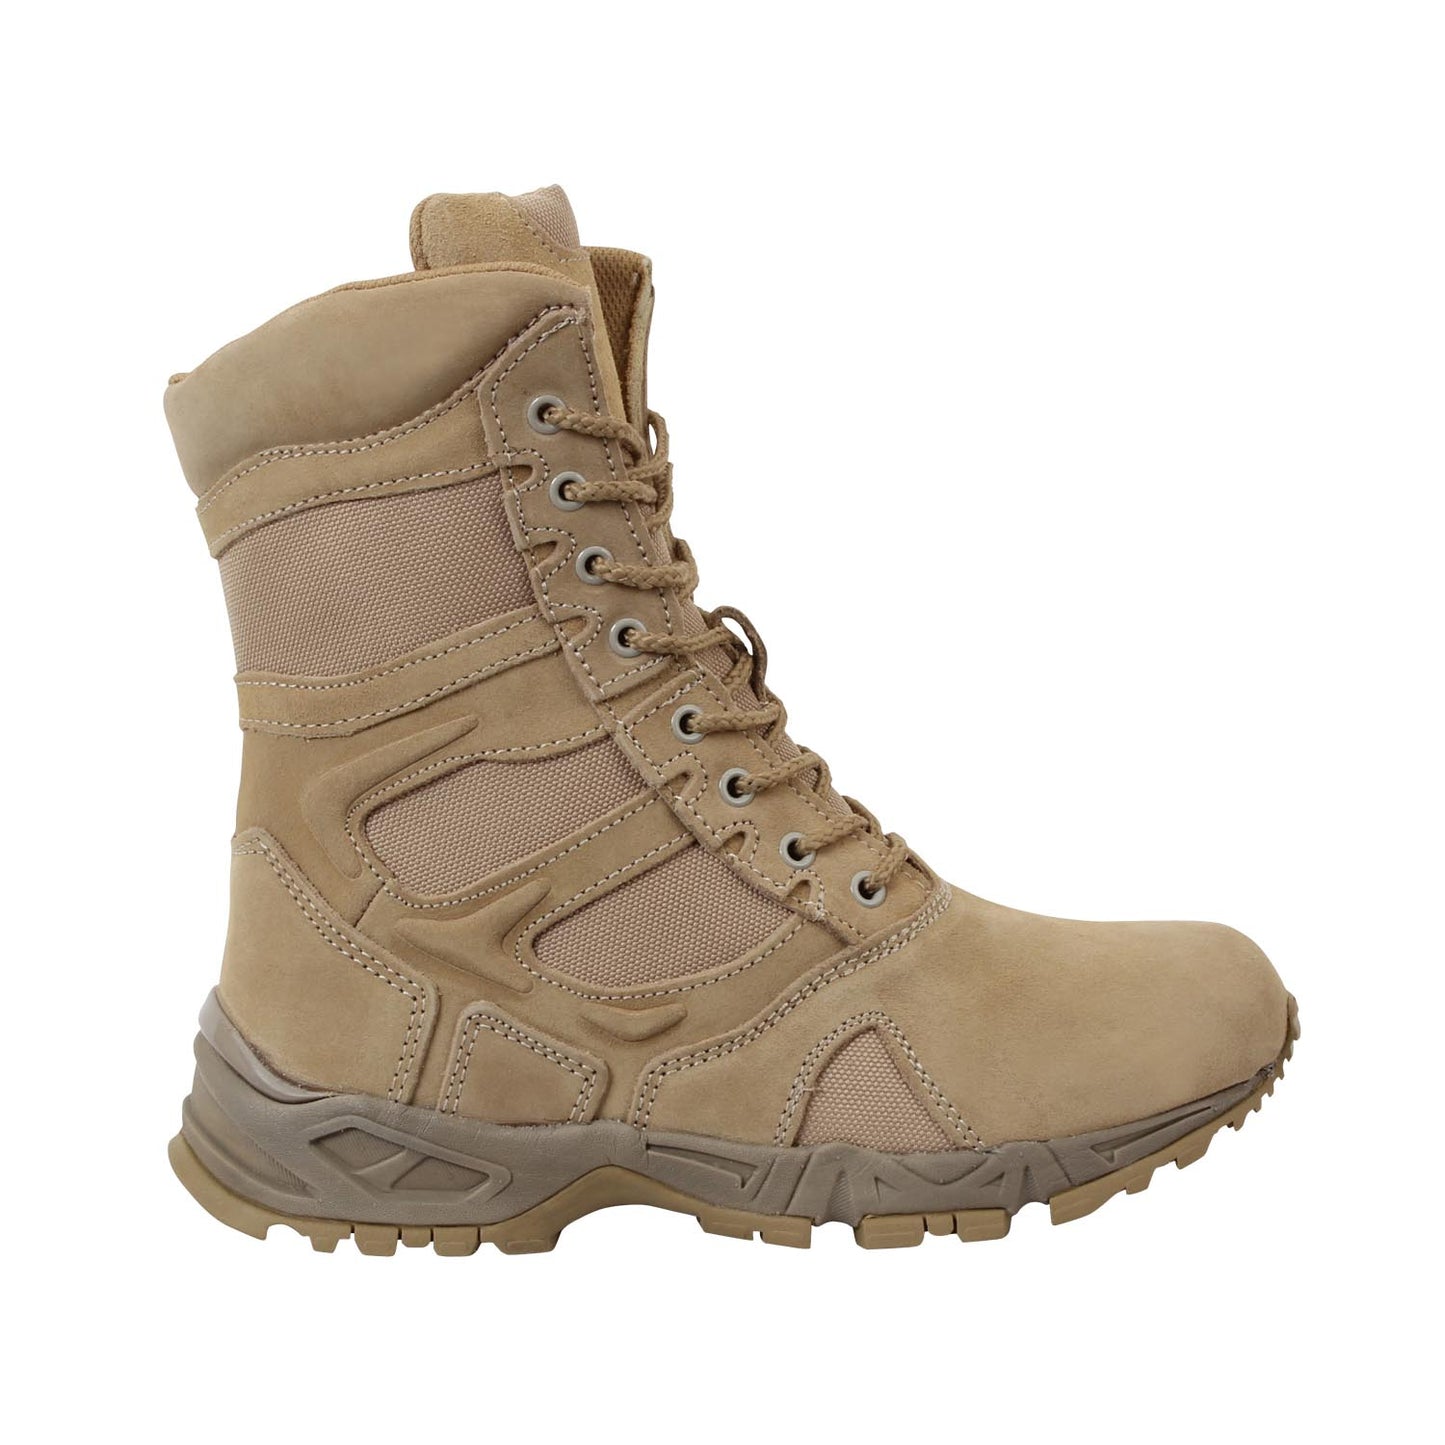 Boots - Rothco Forced Entry Deployment Boots With Side Zipper